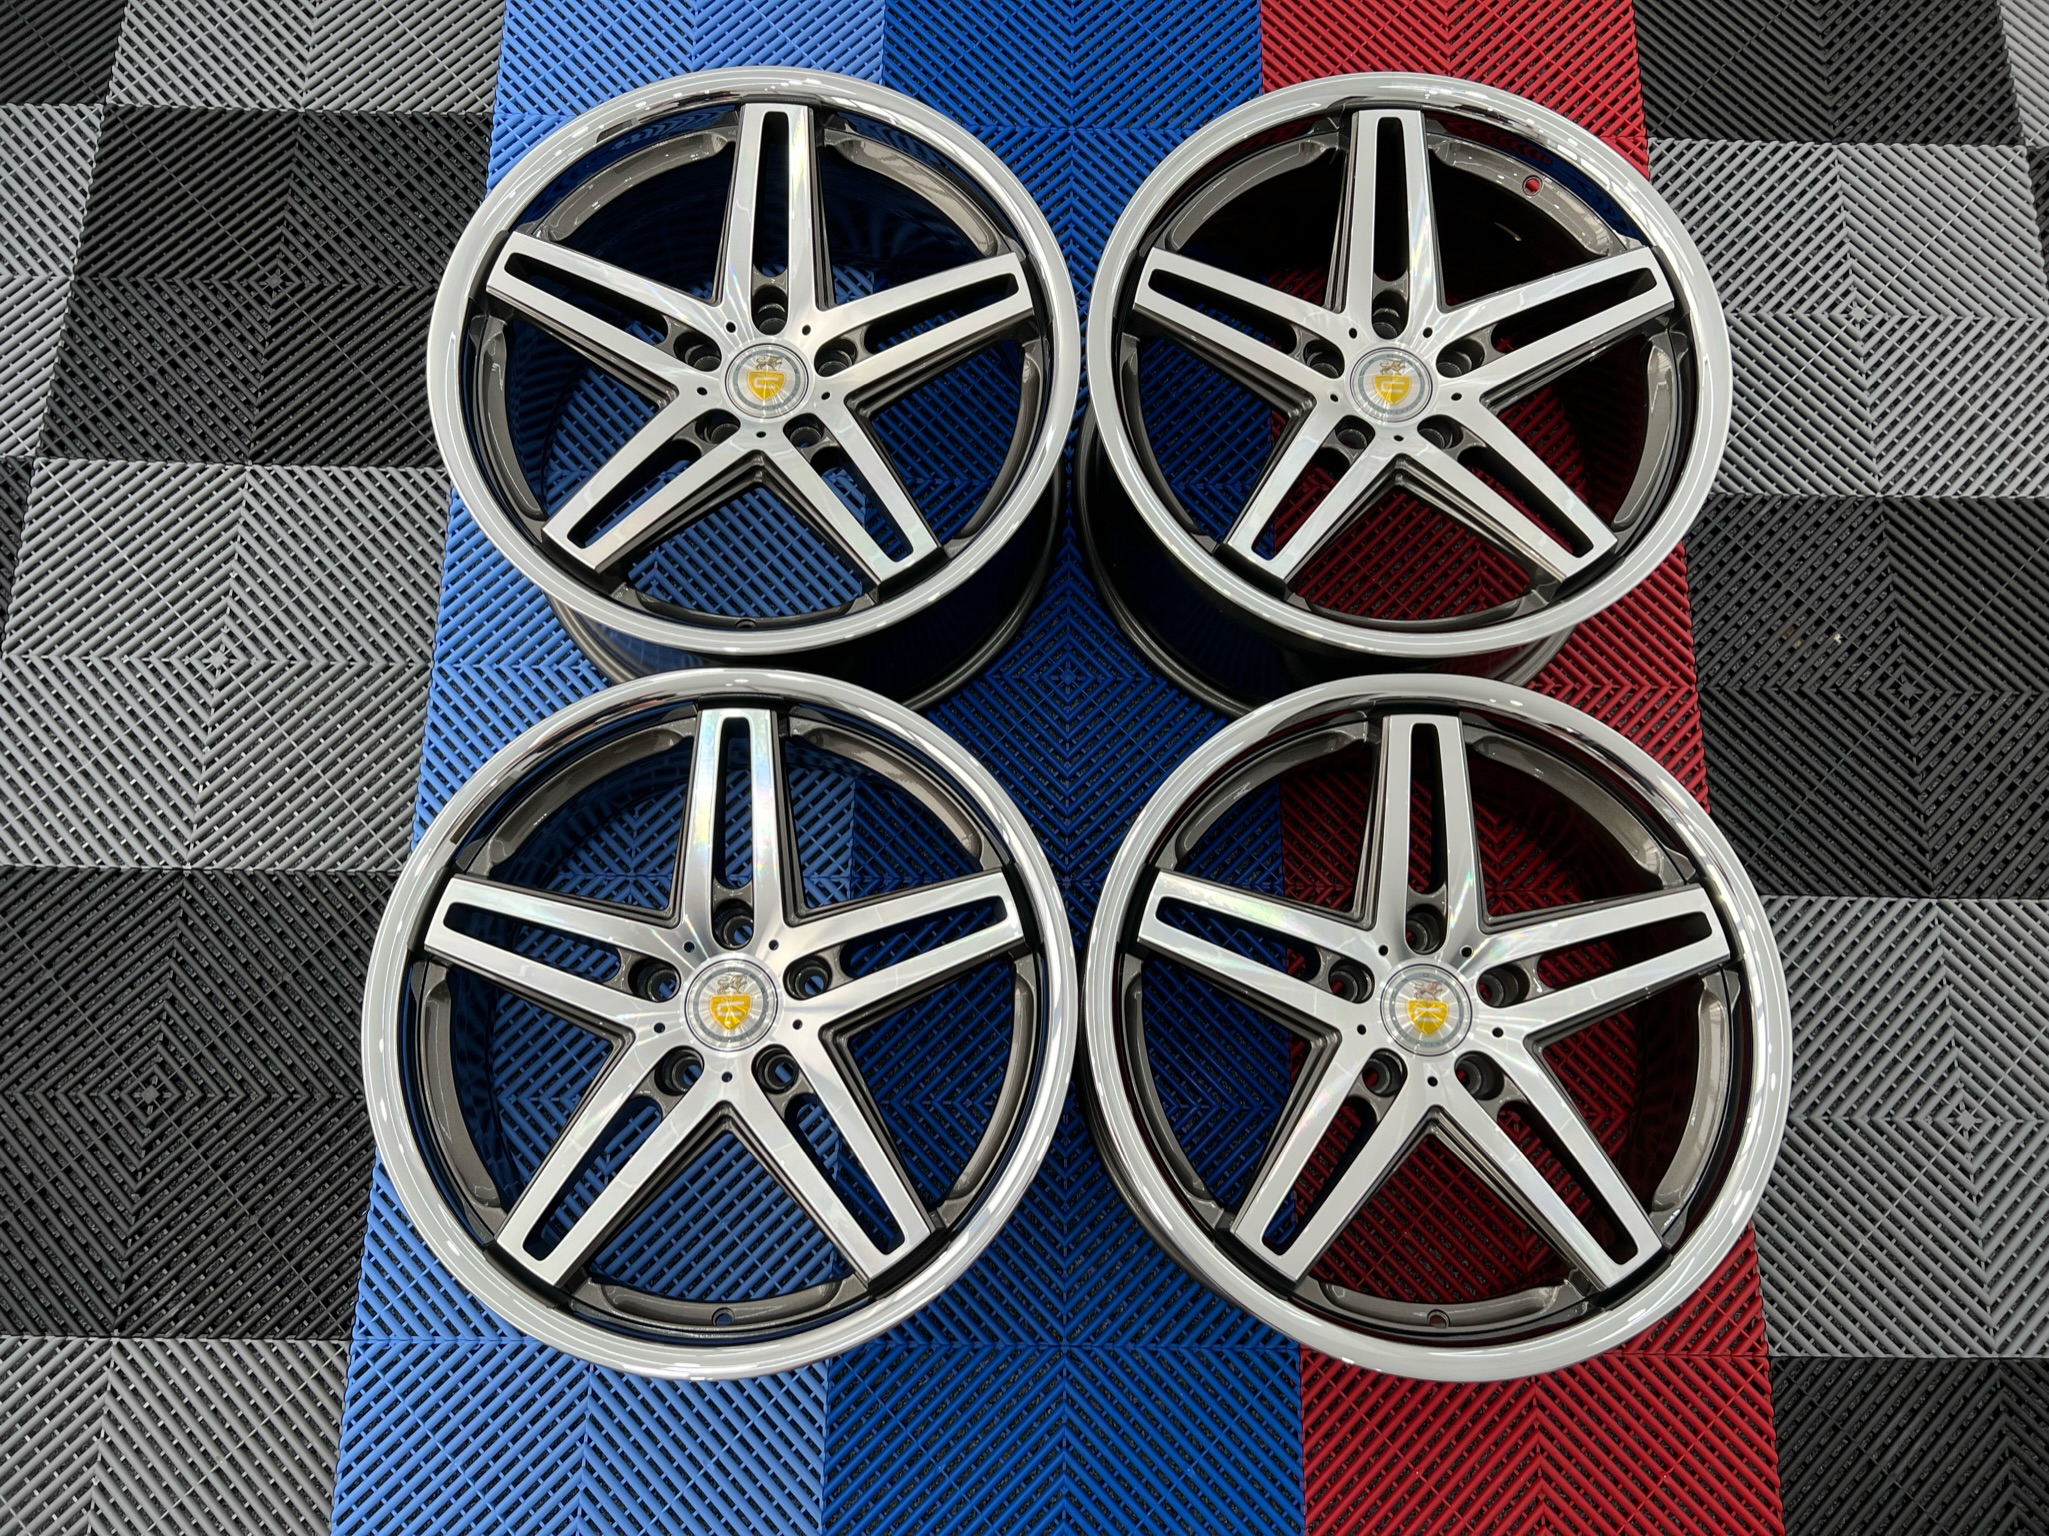 NEW 19" CADES STRIKE ALLOY WHEELS IN GUNMETAL POL AND STAINLESS STEEL DISH